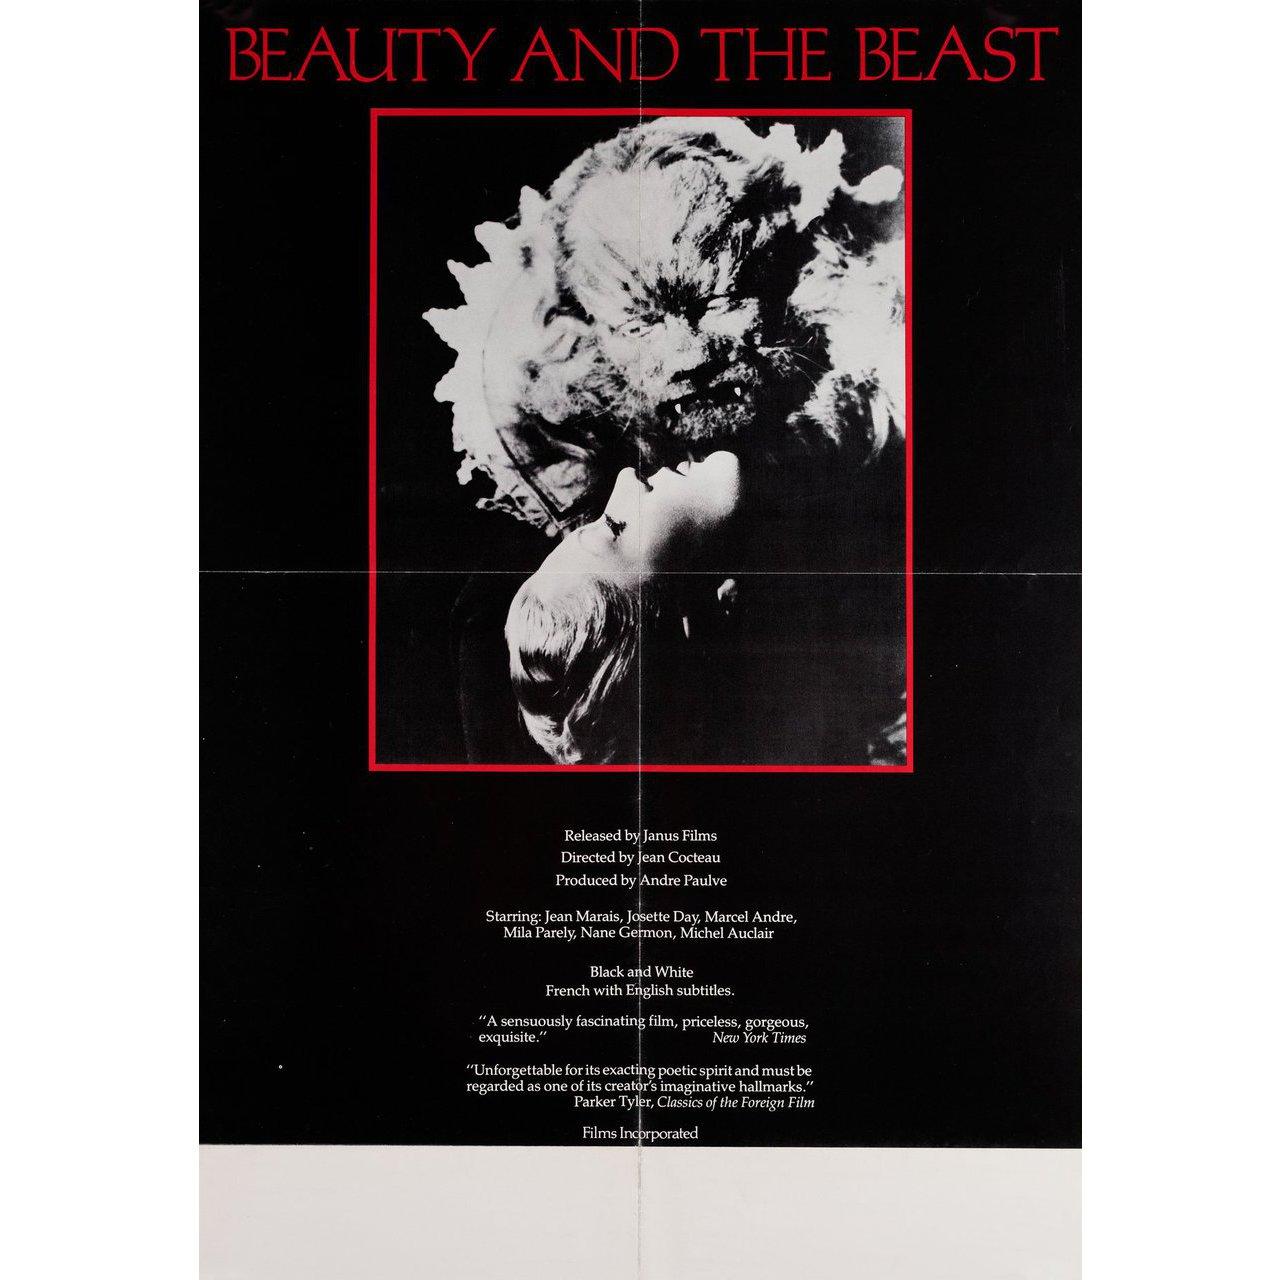 Original 1970s re-release U.S. poster for the 1946 film La belle et la bete (Beauty and the Beast) directed by Jean Cocteau / Rene Clement with Jean Marais / Josette Day / Mila Parely / Nane Germon. Very Good-Fine condition, folded. Many original